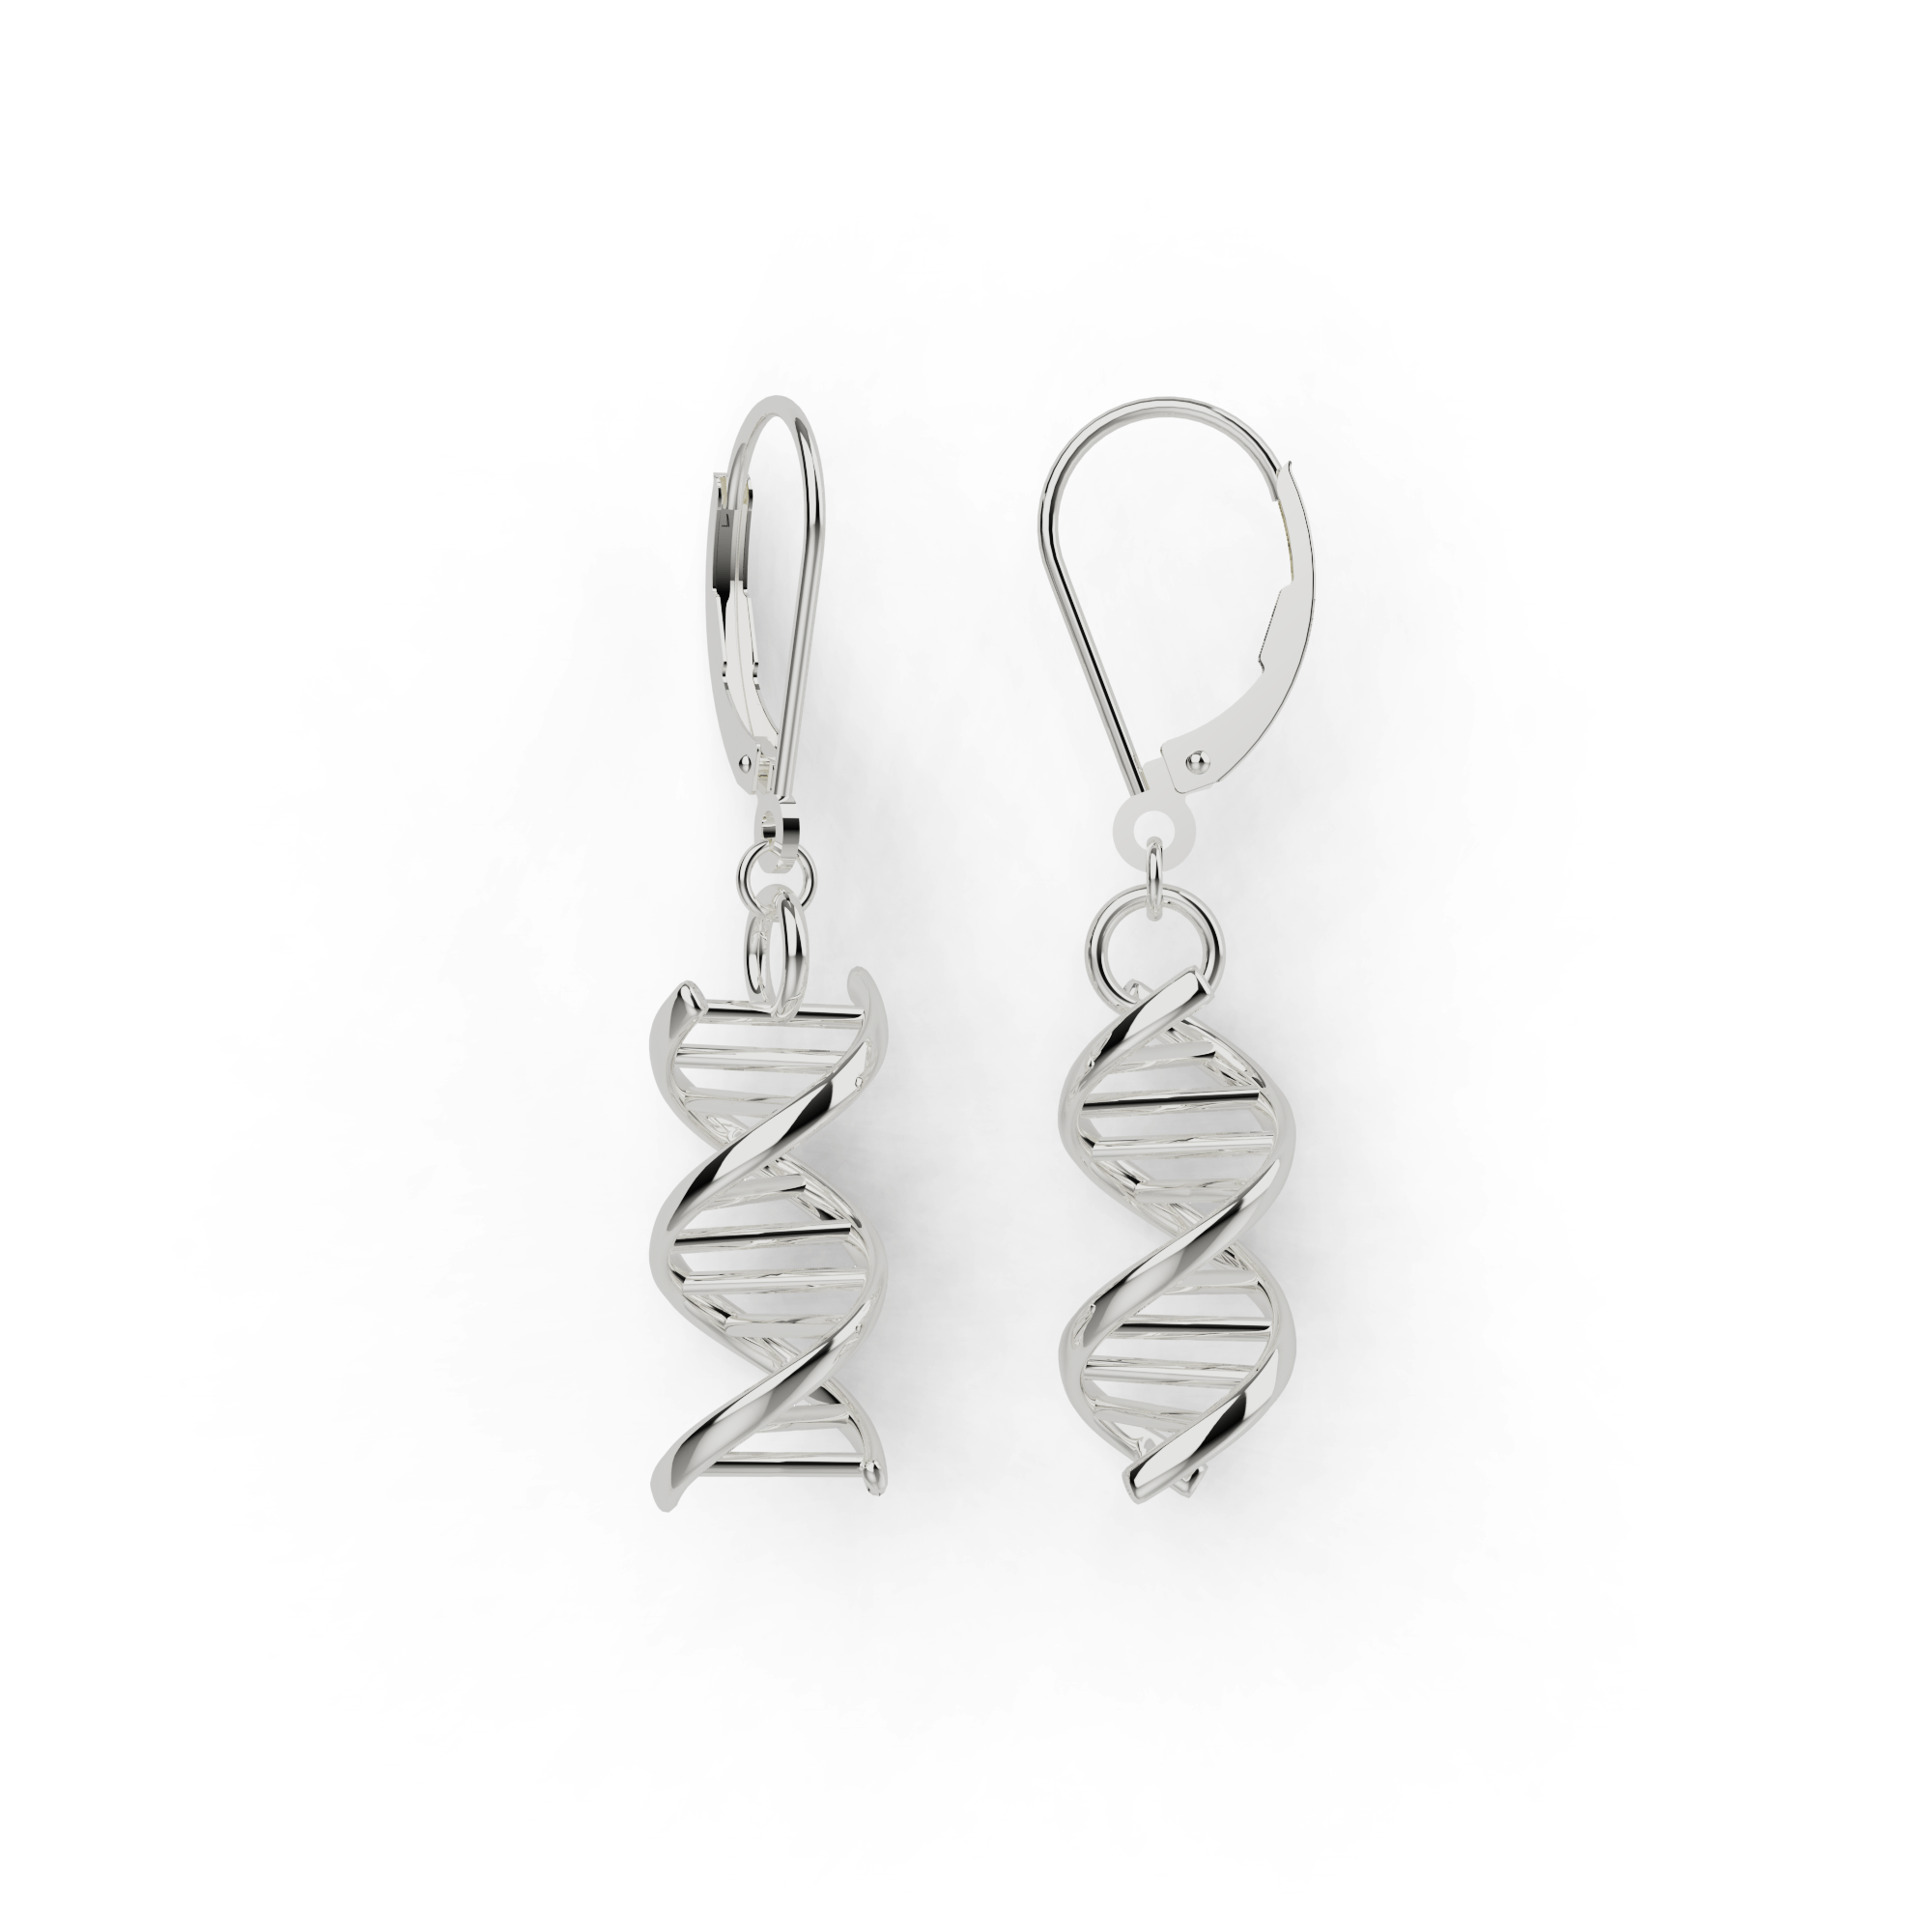 DNA Spiral Earrings - Alicja Centre of Well-Being